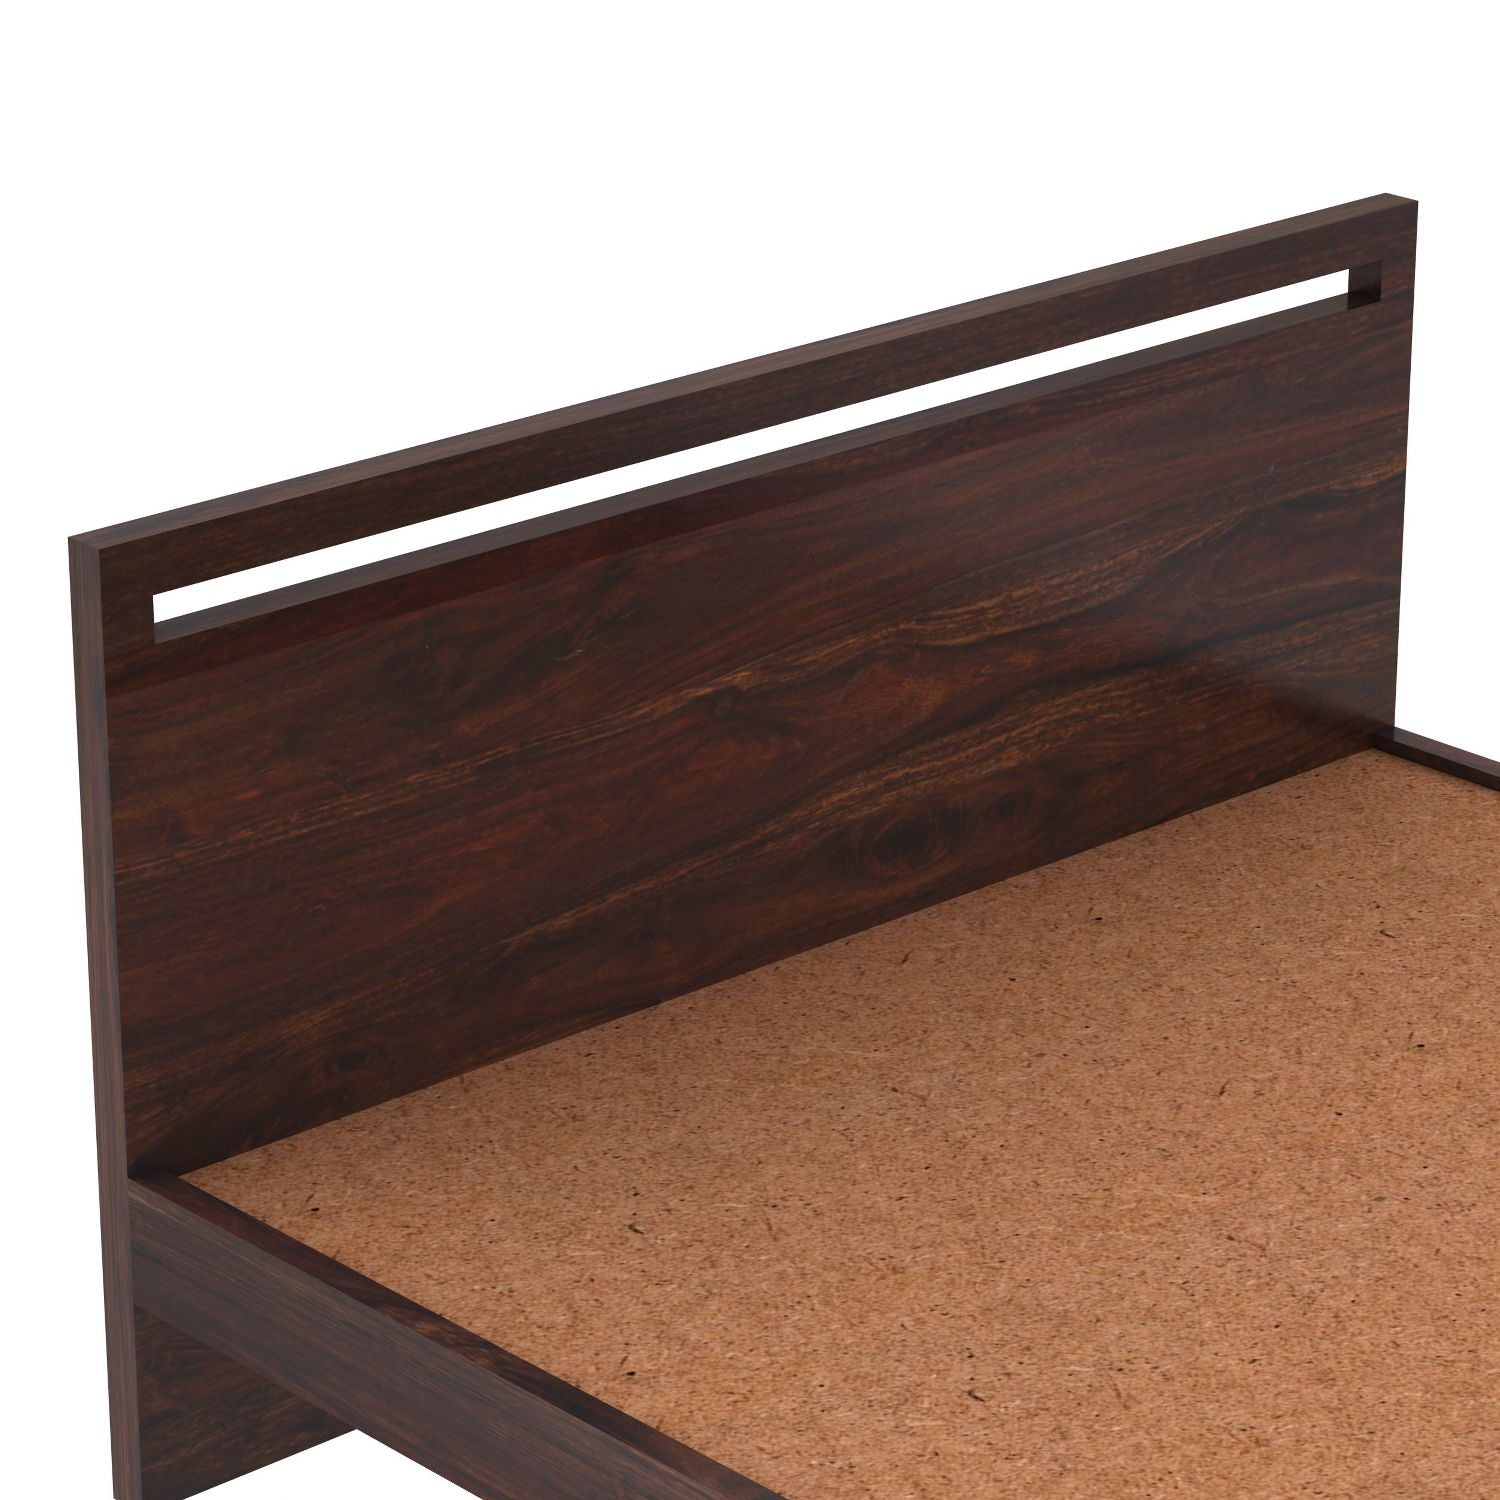 Livinn Solid Sheesham Wood Bed Without Storage (Queen Size, Walnut Finish)